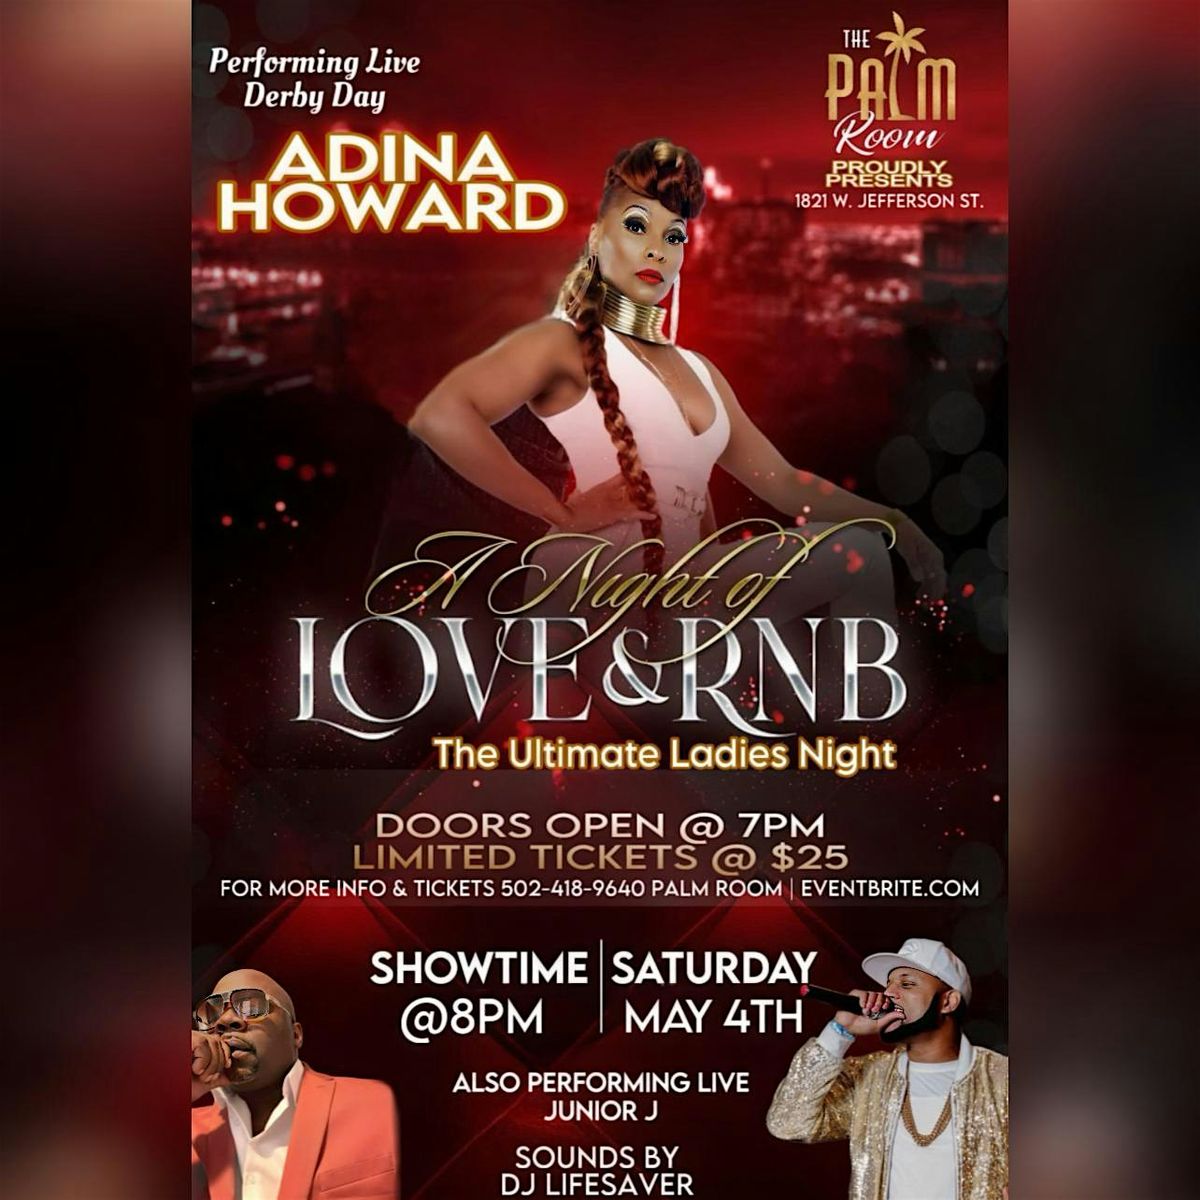 DERBY DAY CONCERT\/ PARTY WITH ADINA HOWARD LIVE AT THE PALM ROOM